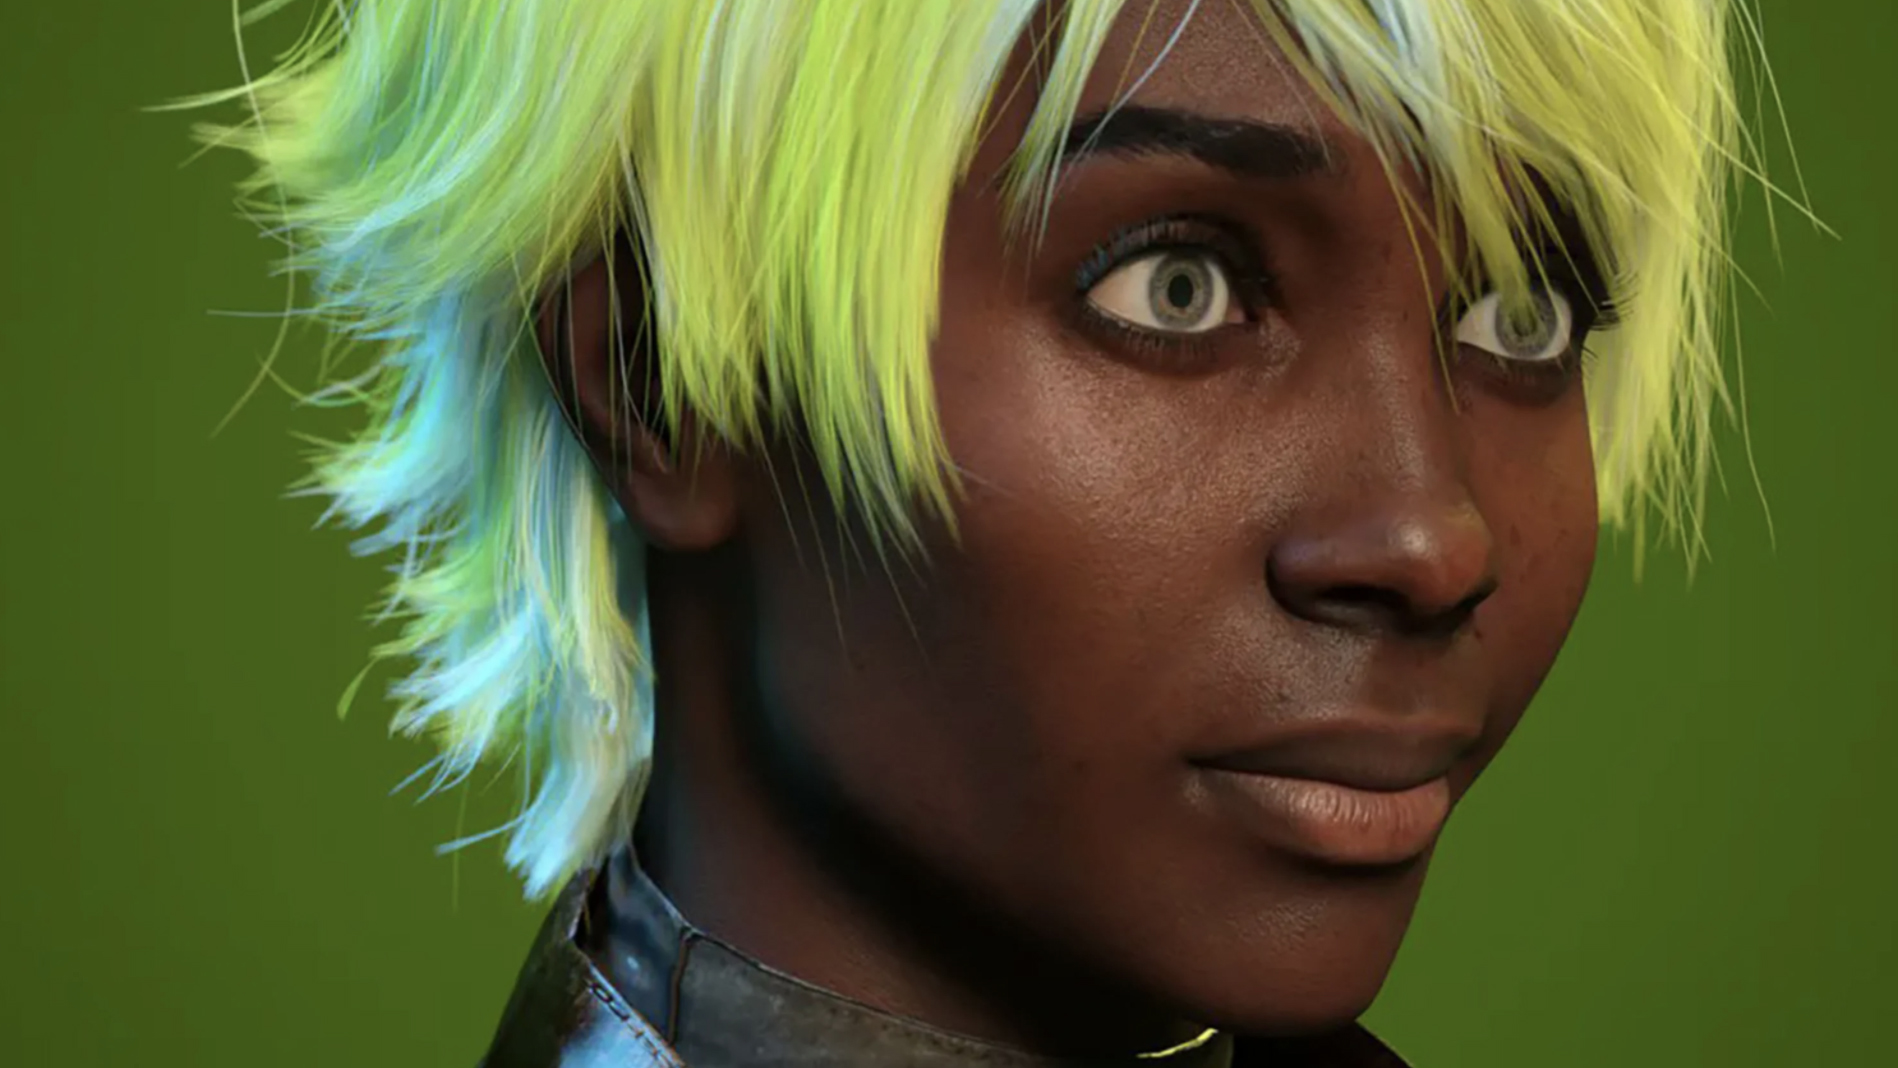 NFT art and the future of NFTs, illustrated by a 3d character created in Daz 3D